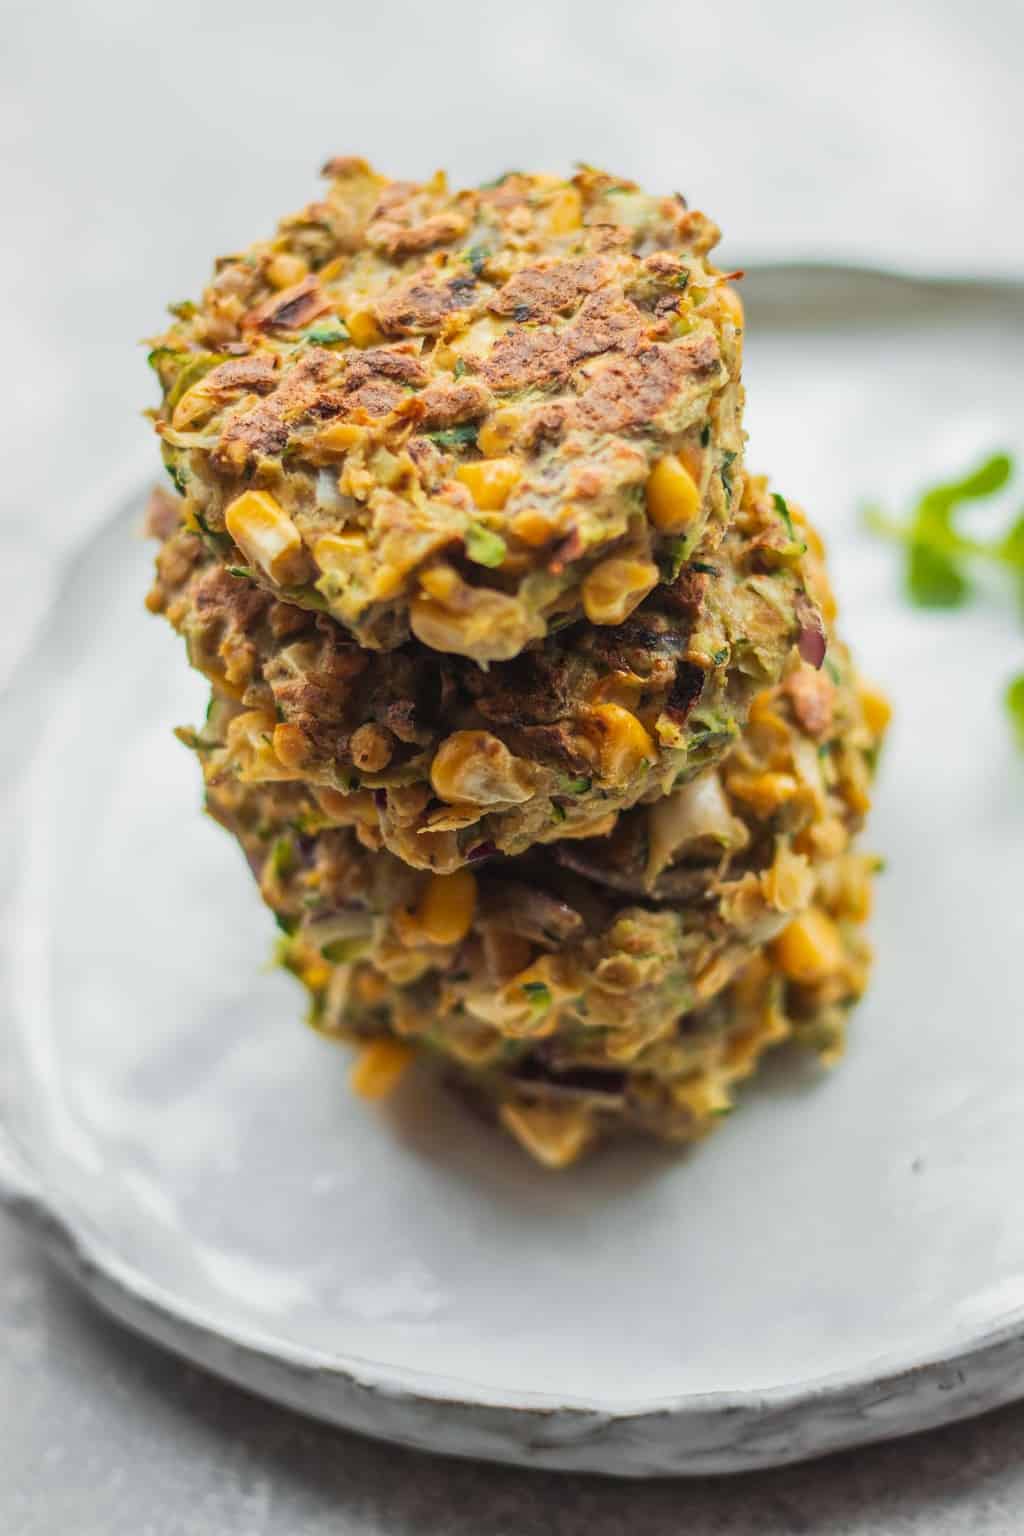 Healthy vegan zucchini fritters with red lentils